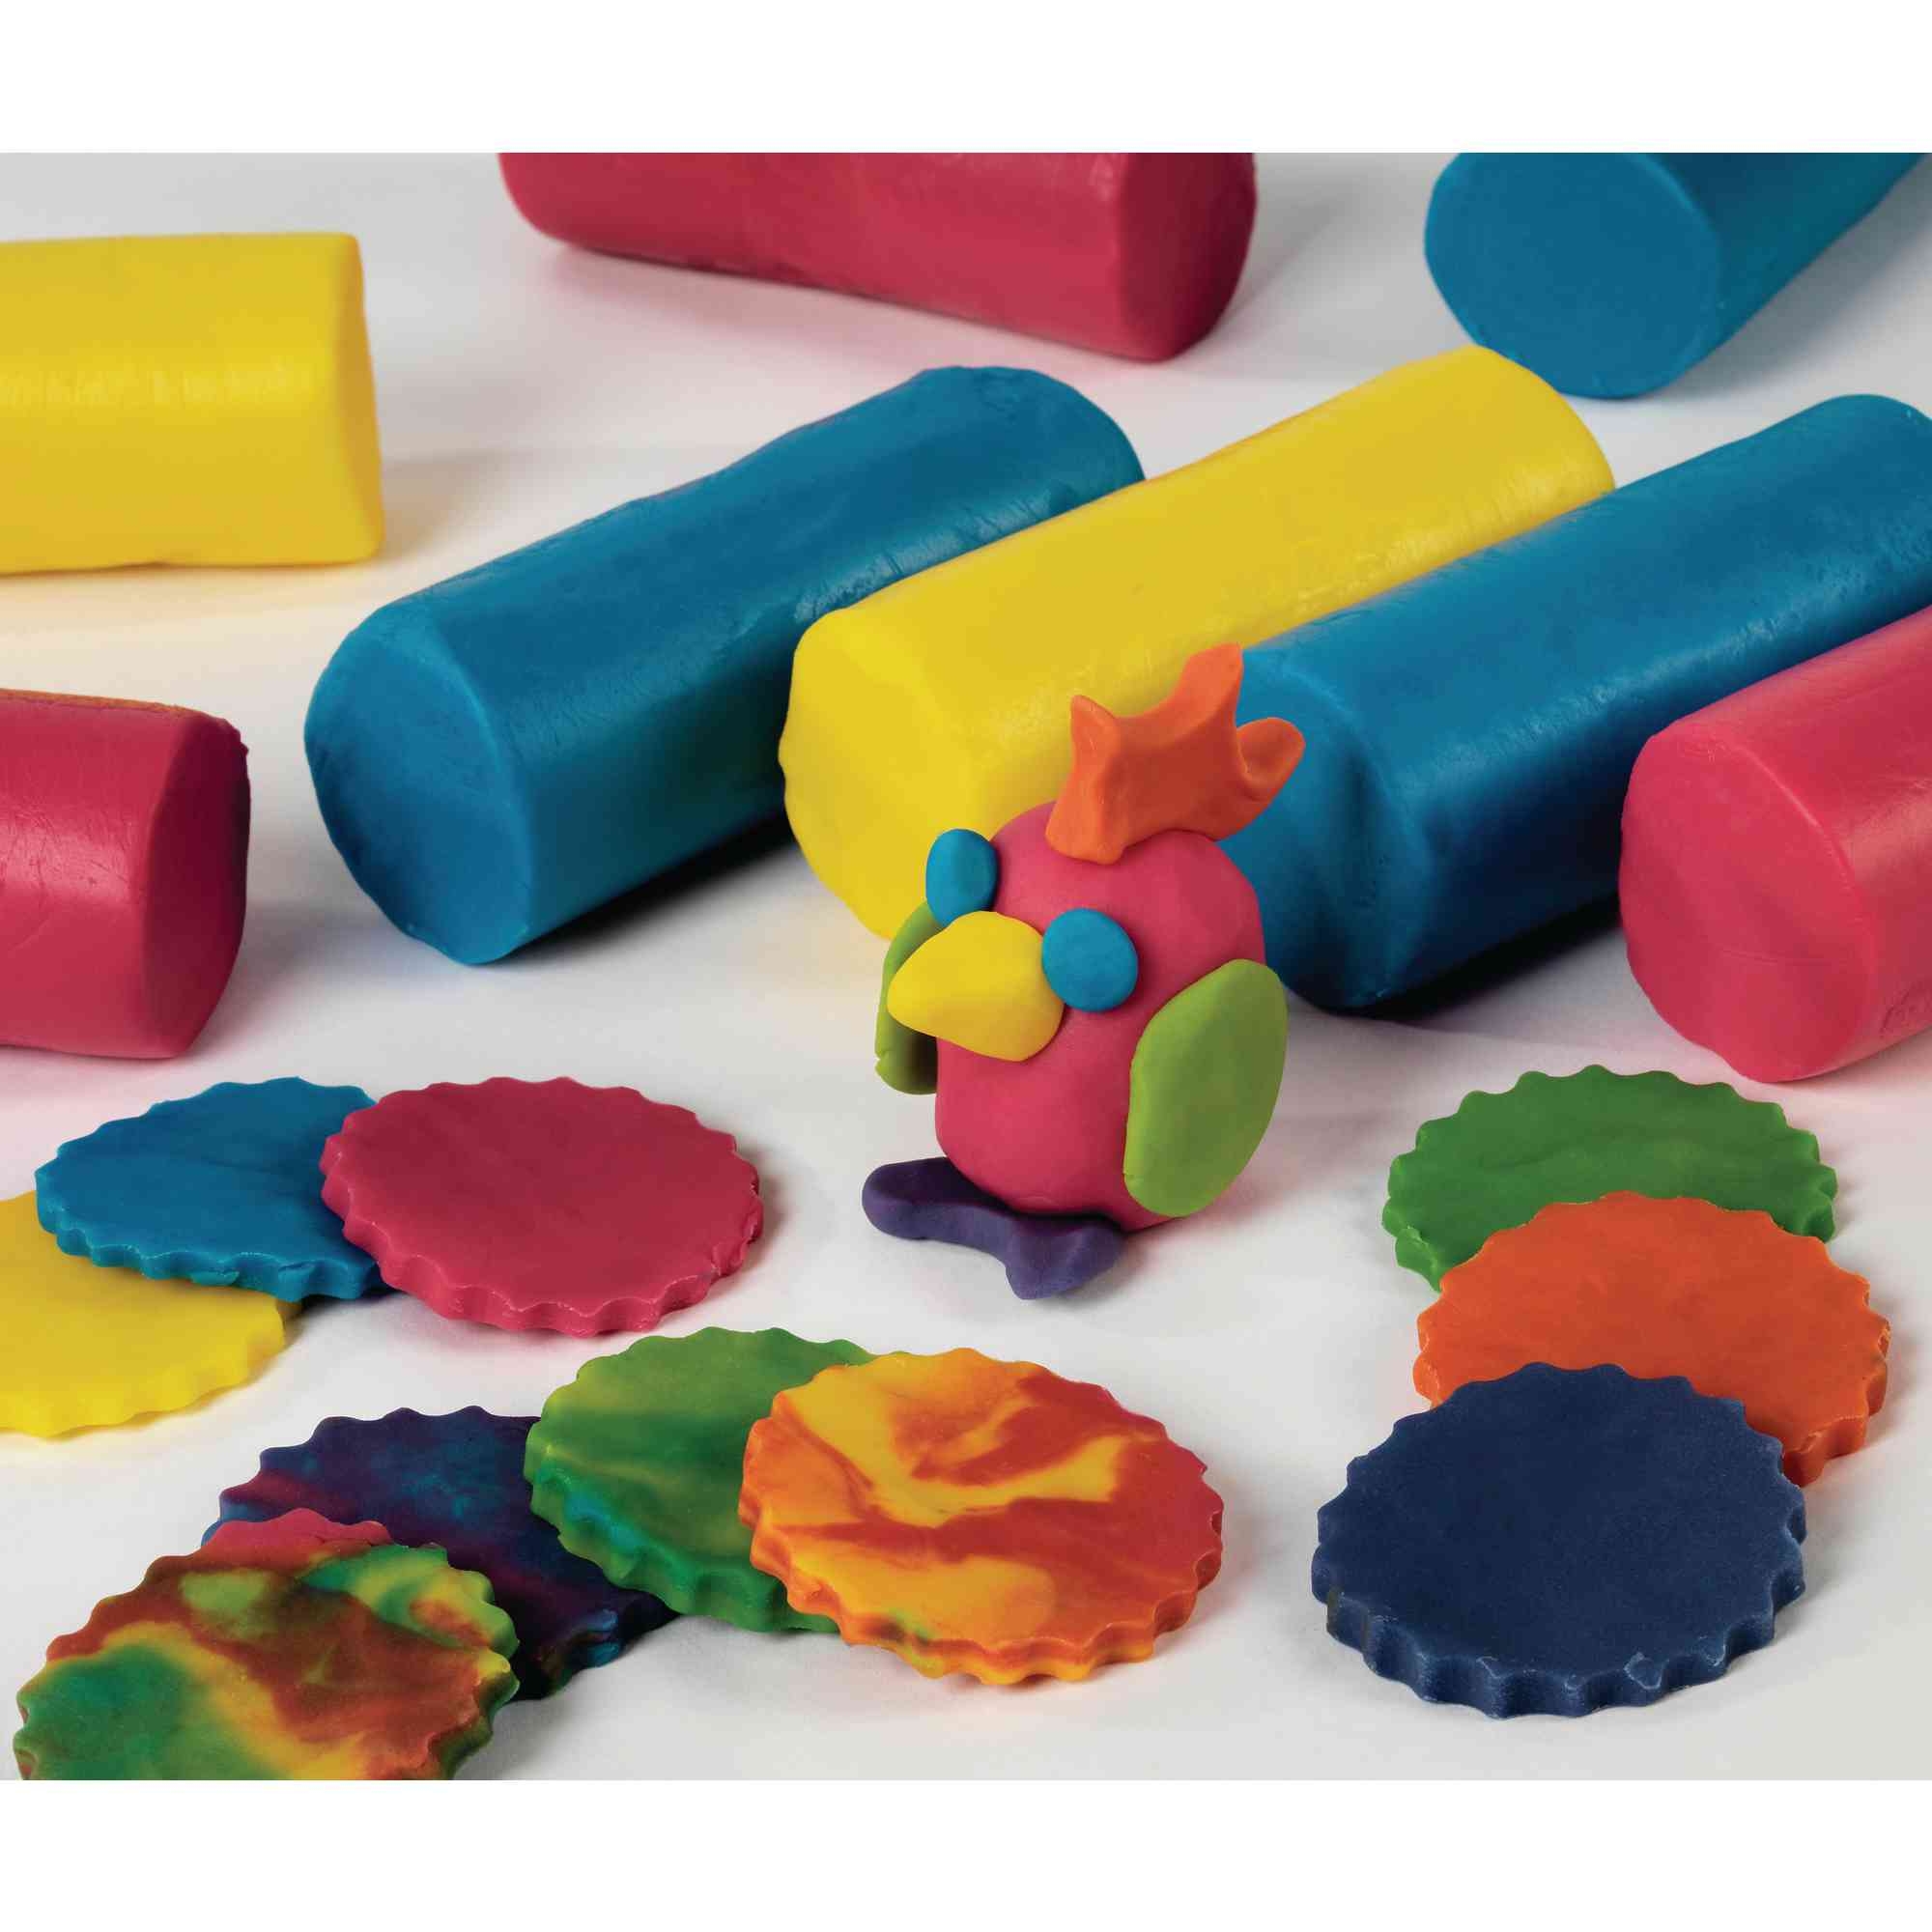 Colour Mixing Soft Dough - Pack of 6